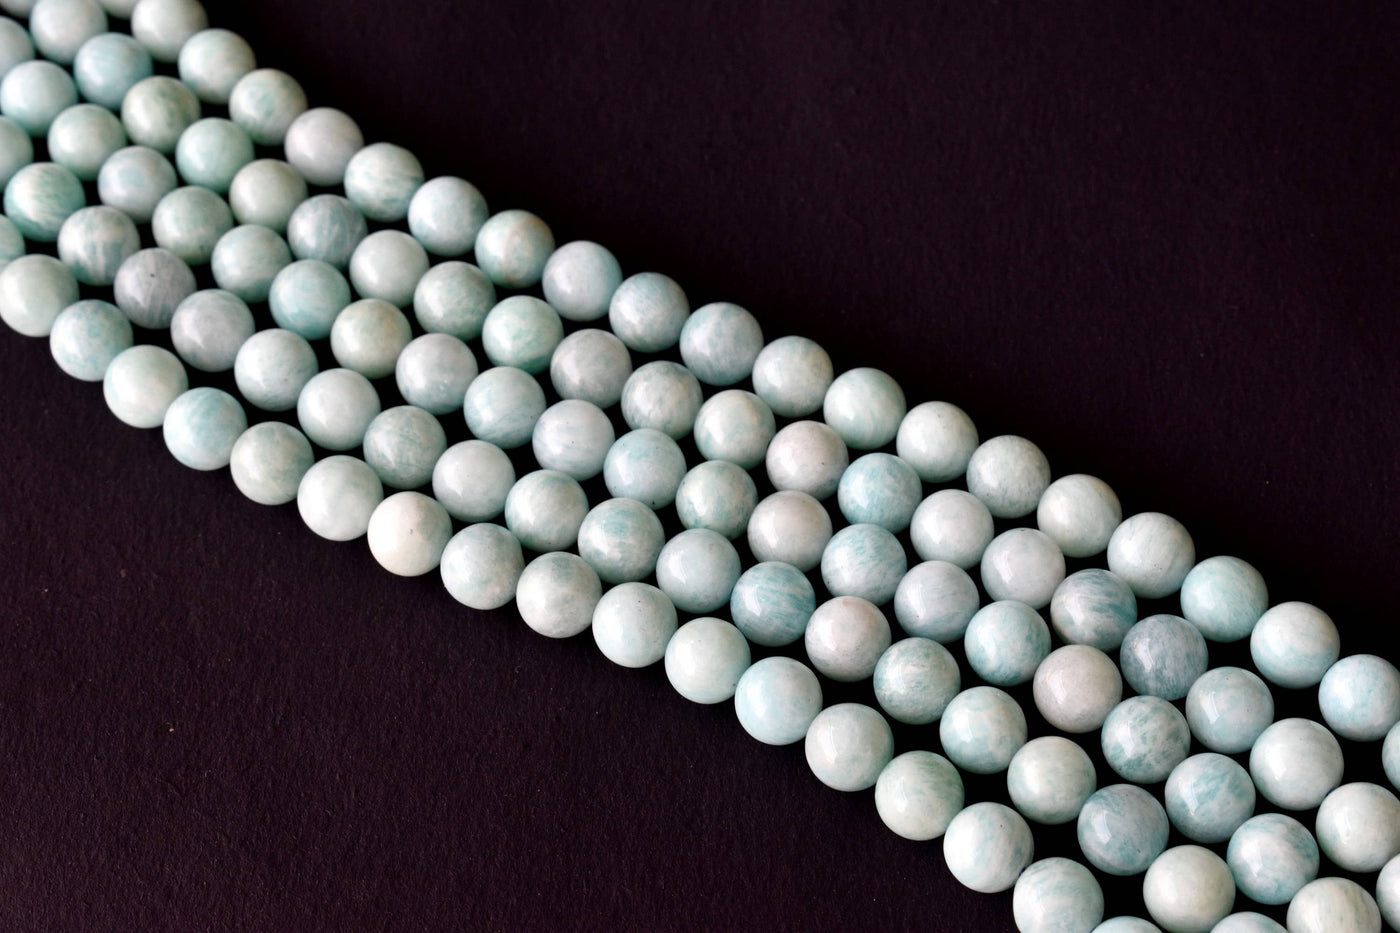 Amazonite Beads, Natural Crystal Round Beads 4mm to 10mm